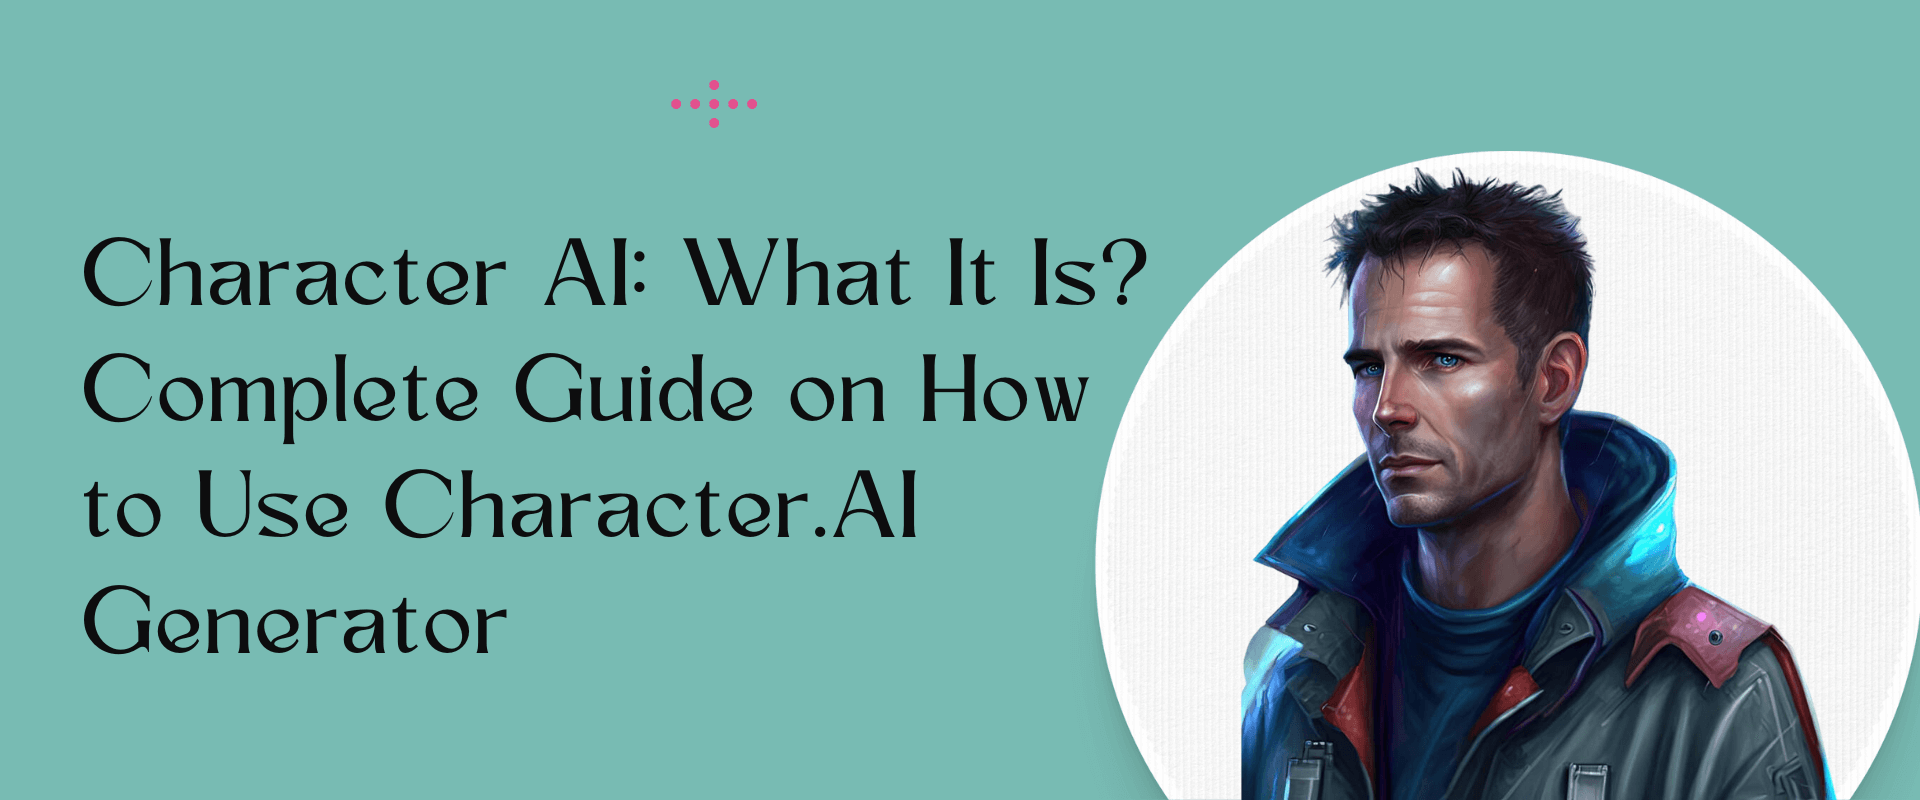 Character AI: What It Is? Complete Guide on How to Use Character.AI Generator